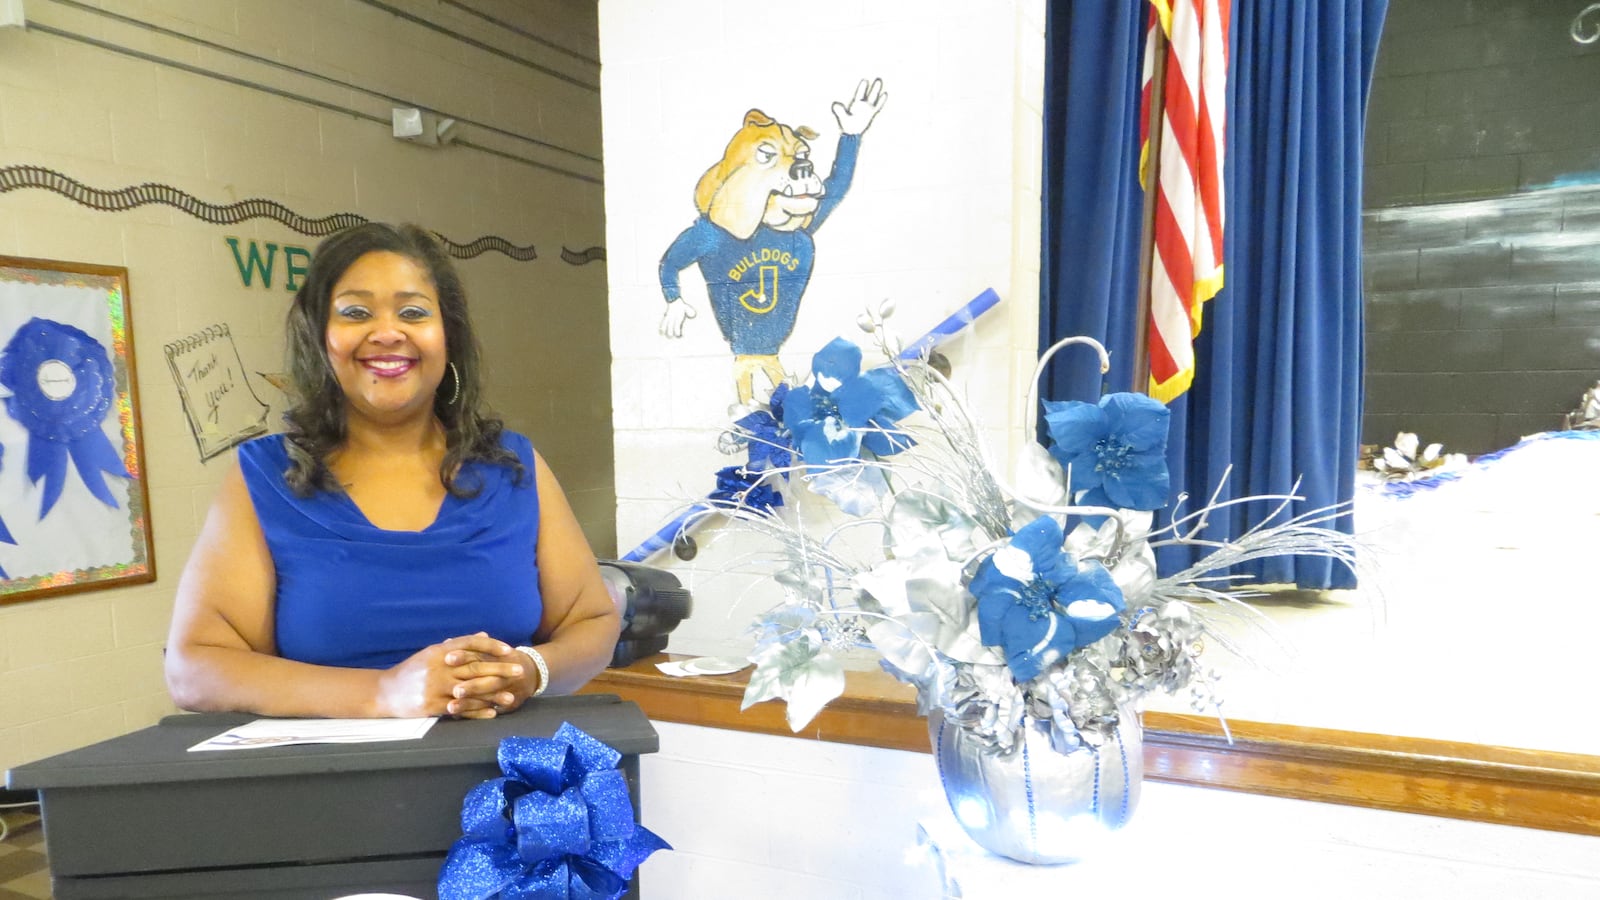 Principal Yolanda Heidelberg celebrates during a schoolwide event in November at Jackson Elementary, one of two Memphis schools honored as a 2016 National Blue Ribbon School.